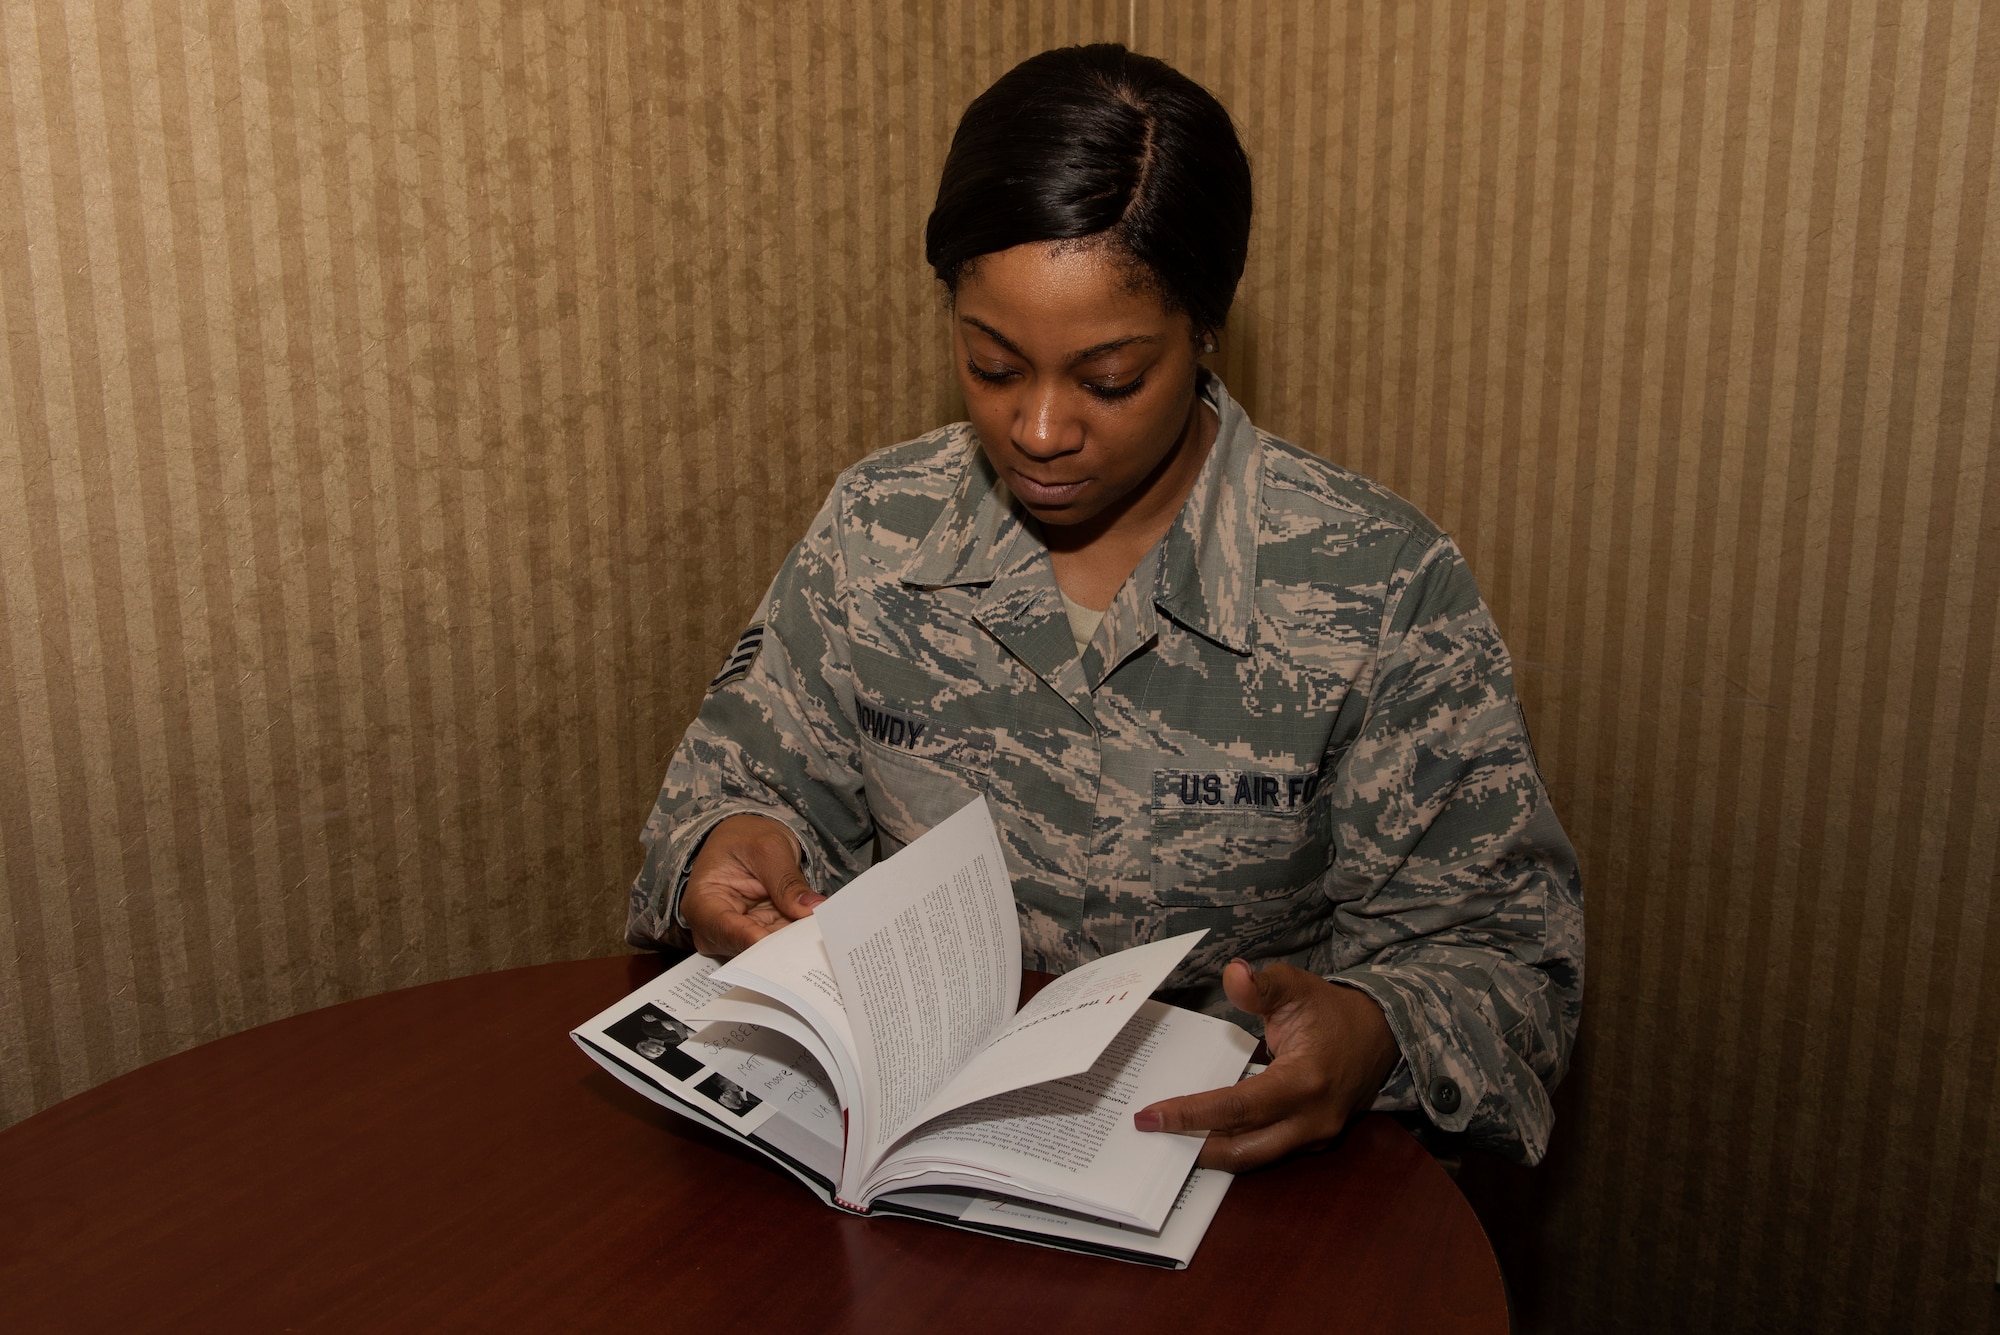 U.S. Air Force Staff Sgt. Lashauna Dowdy, 60th Force Support Squadron front desk clerk, reads “The One Thing: The Surprisingly Simple Truth Behind Extraordinary Results” by Gary Keller, inside the Westwind Inn April 1, 2019 at Travis Air Force Base, California. The book was the second book featured in the Professional Literature Program, which was implemented at Travis in February 2019. (U.S. Air Force photo by Tech. Sgt. James Hodgman)